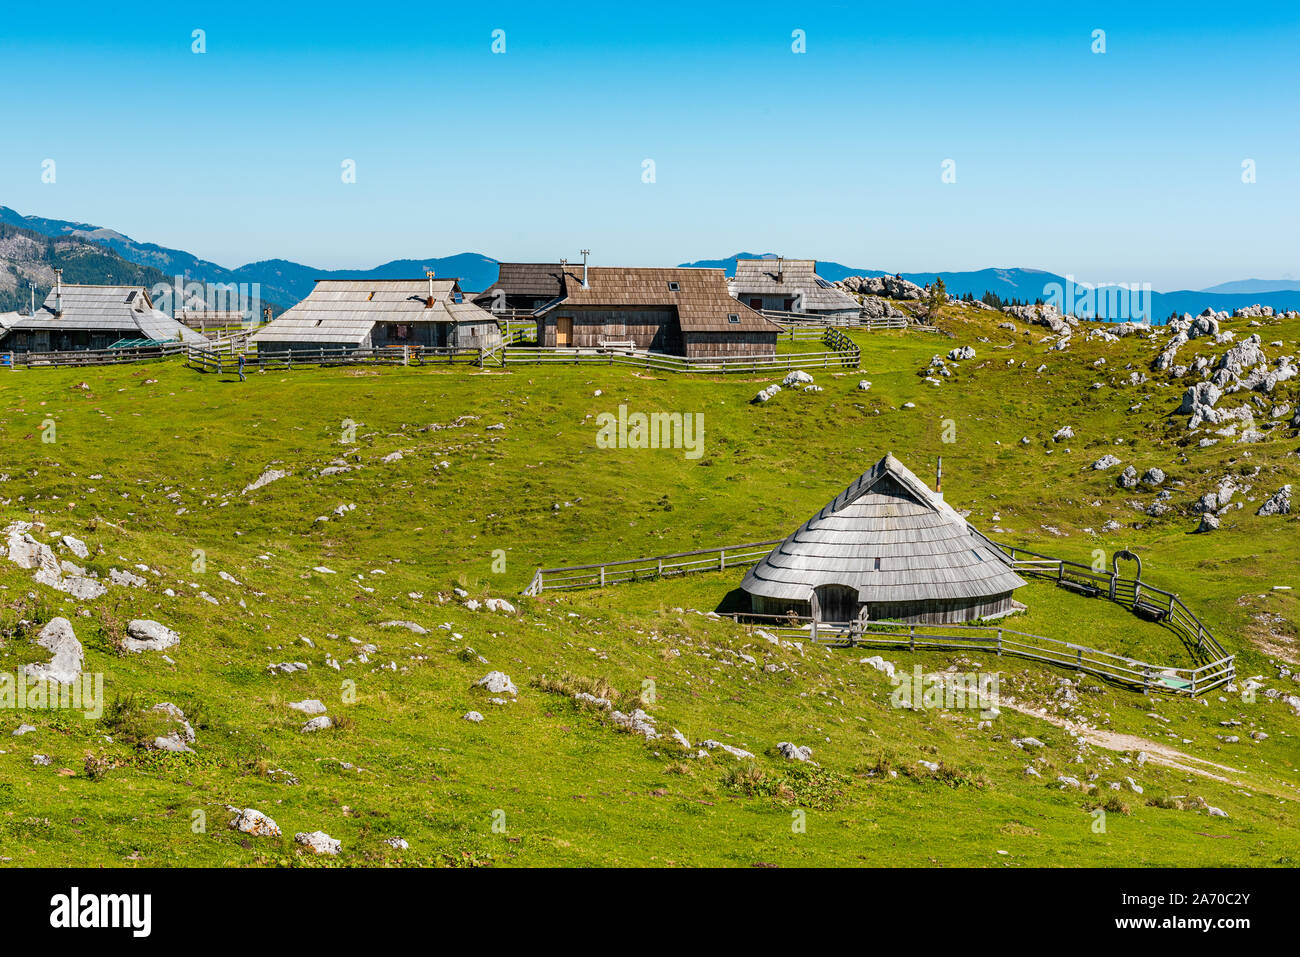 Big Pasture Plateau or Velika Planina in Slovenia. traditional Wooden Shepherd Shelters in Mountains. Stock Photo